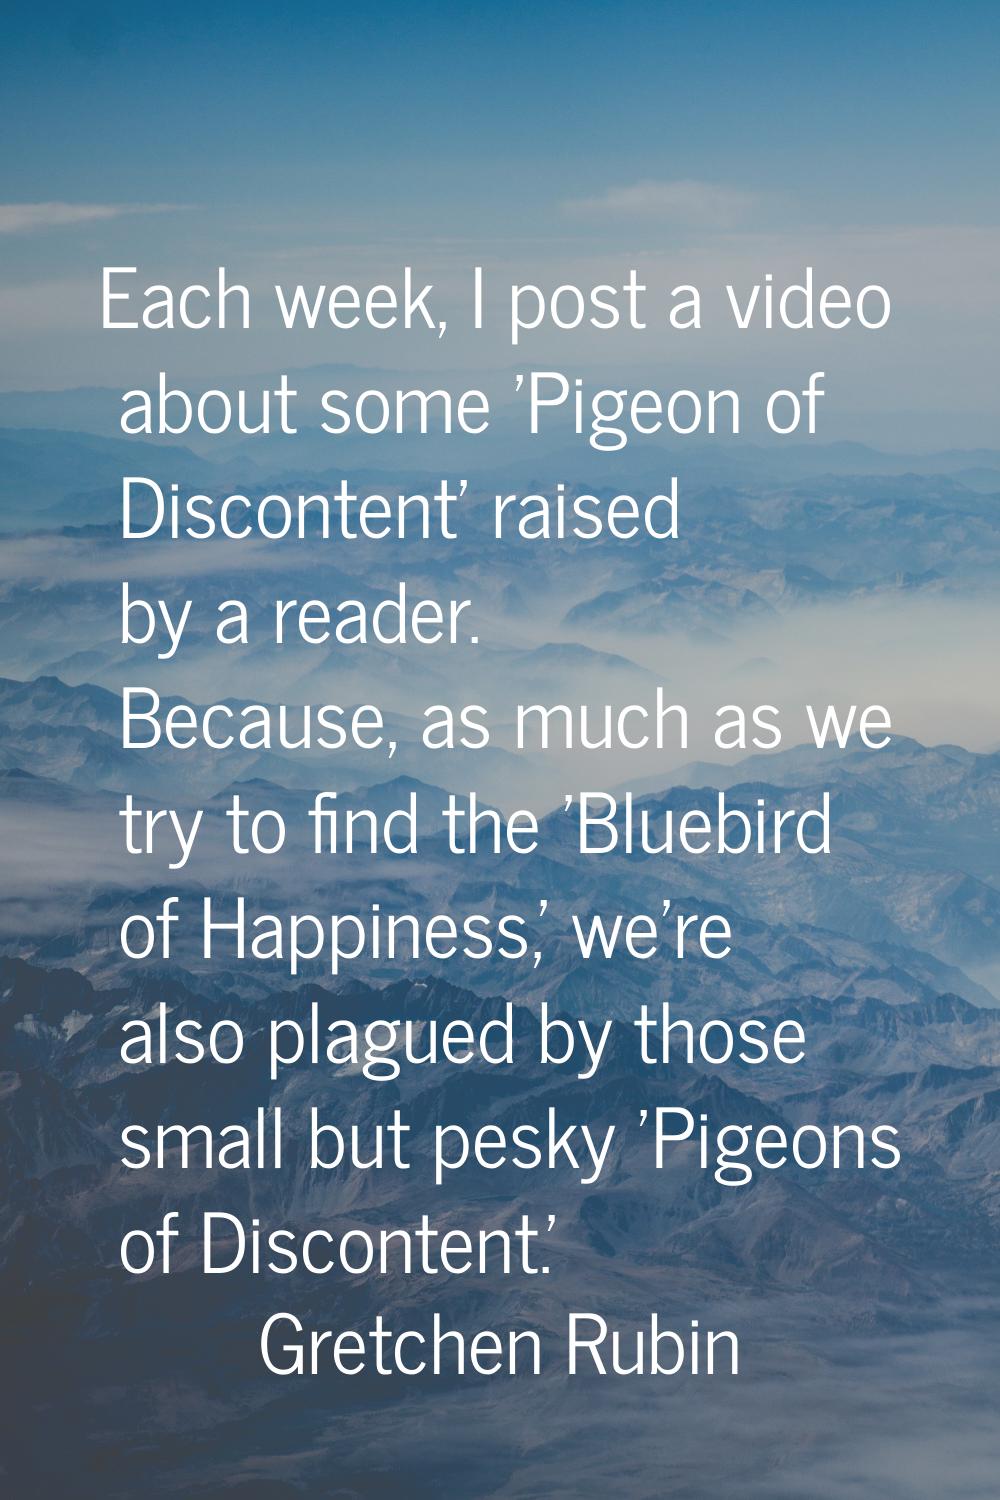 Each week, I post a video about some 'Pigeon of Discontent' raised by a reader. Because, as much as